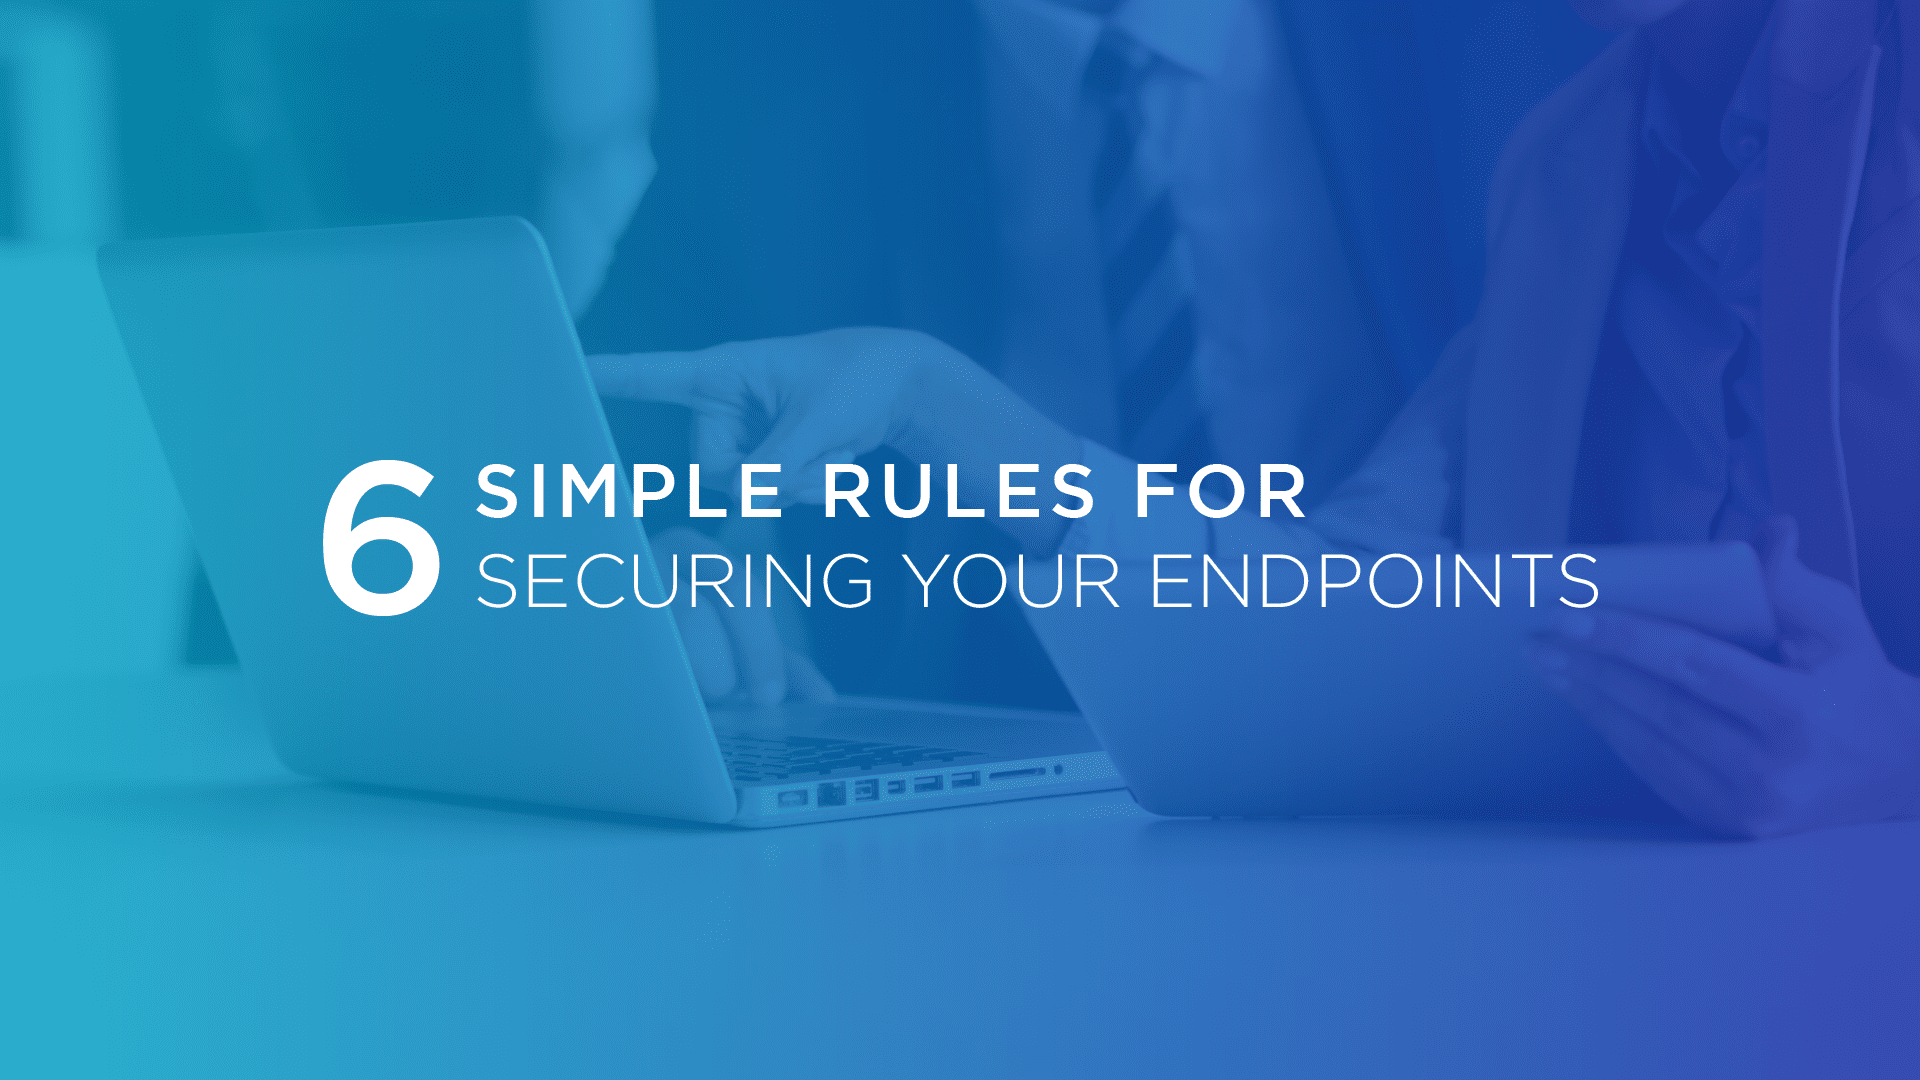 6 Simple Rules for Securing Your Endpoints